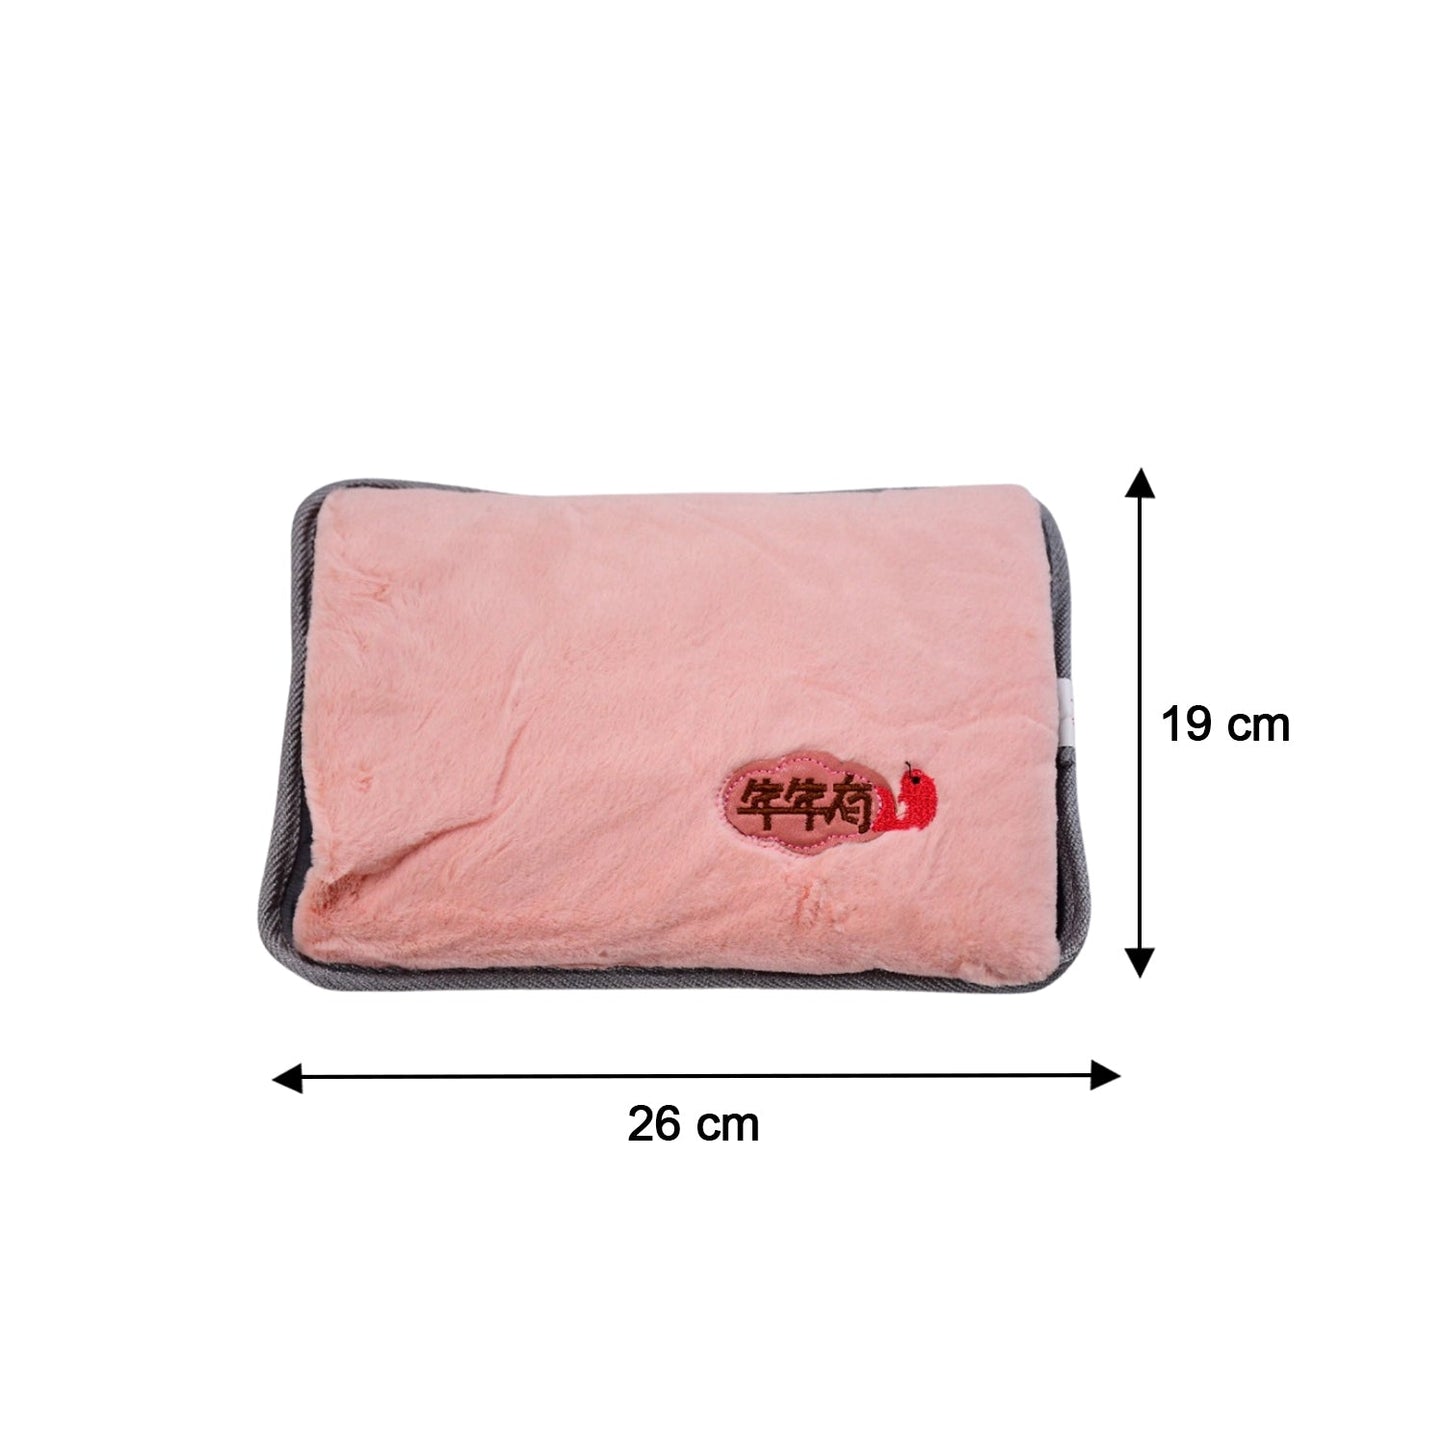 6544 electric heating bag, hot water bag, Heating Pad, Electrical Hot Warm Water Bag, Heat Bag with Gel for Back pain , Hand , muscle Pain relief , Stress relief with Box DeoDap